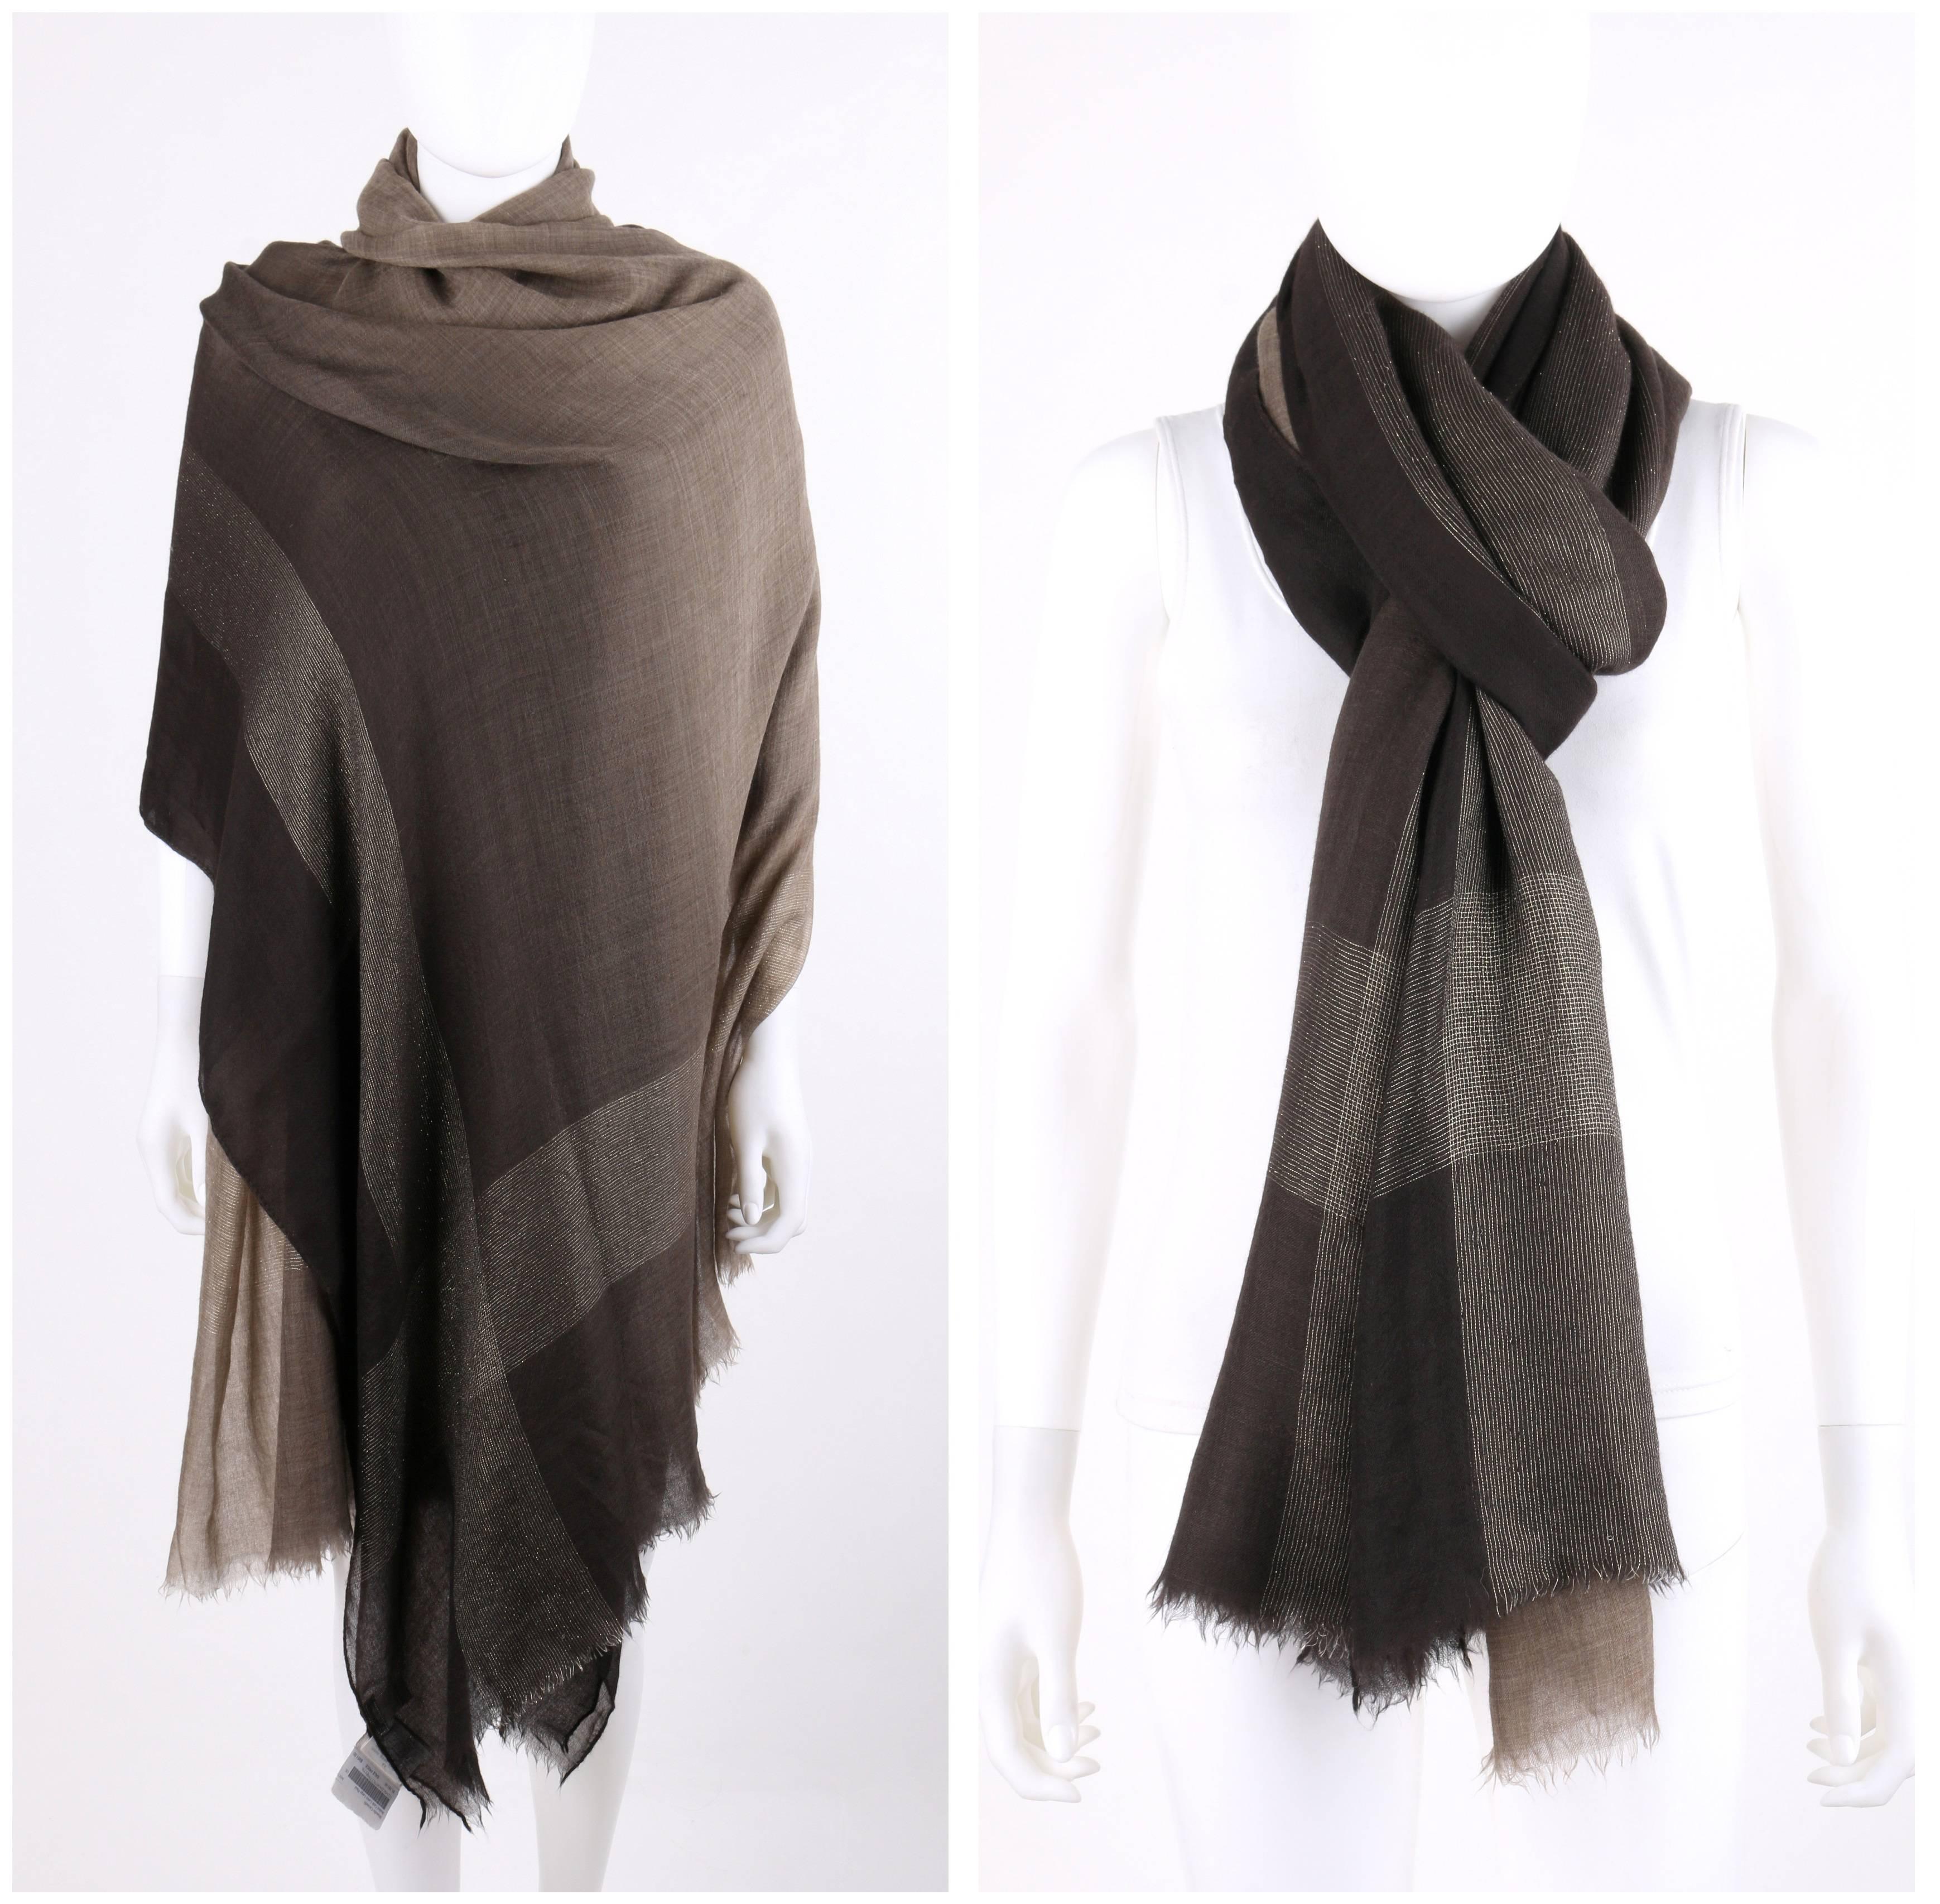 Brunello Cucinelli Cashmere Autumn/Winter 2013 brown boiled cashmere ombre plaid over-sized scarf / shawl; New with tags.  Dark brown to beige ombre cashmere. Metallic gold lurex large plaid pattern. Short fringed edge at top and bottom with rolled